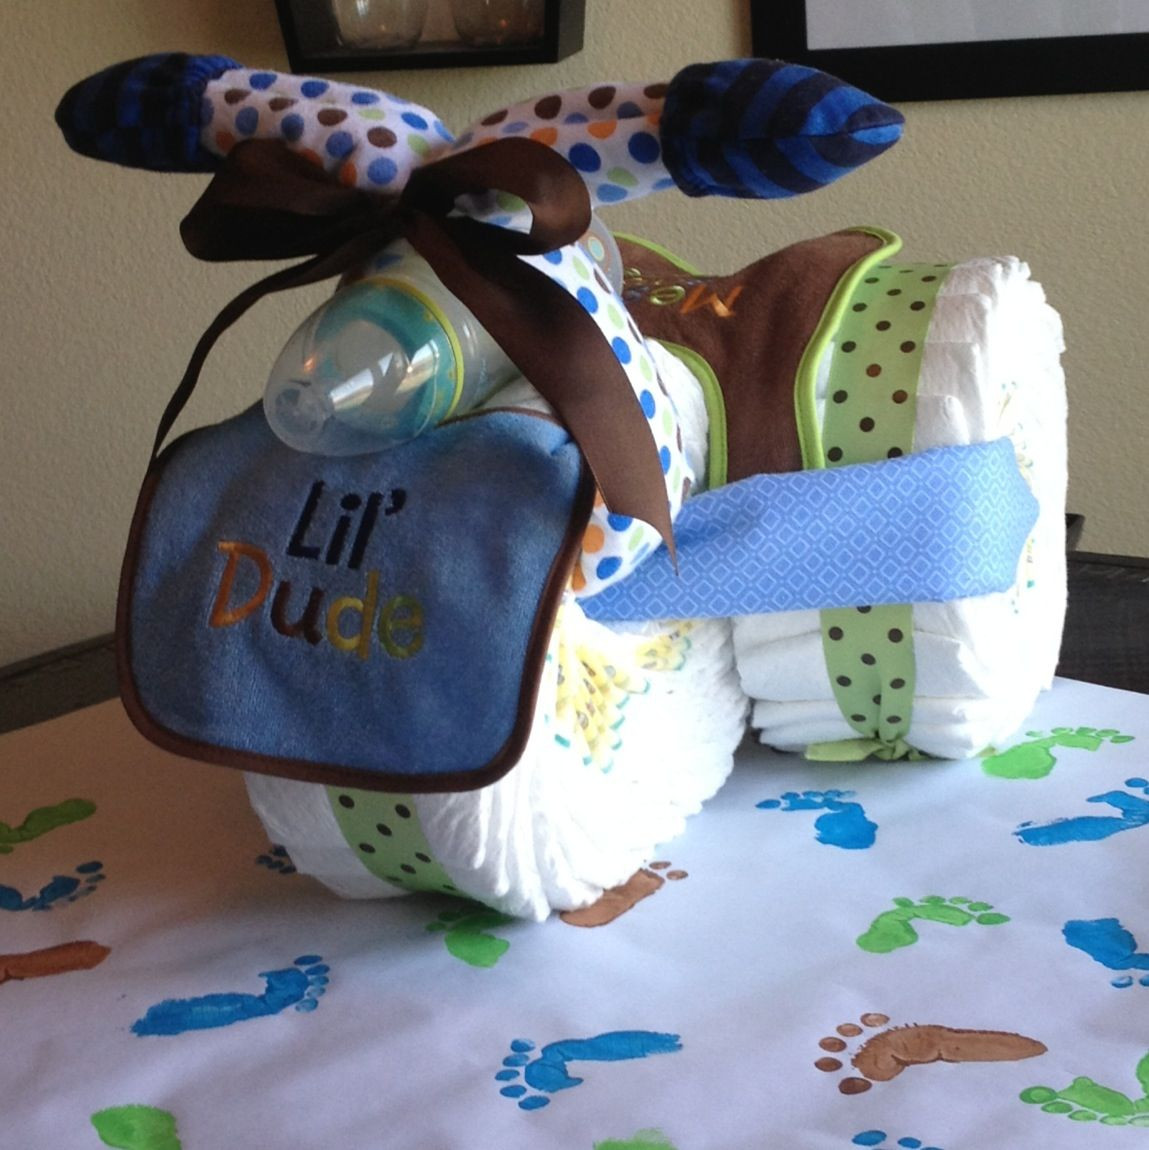 Crafty Baby Shower Gift Ideas
 Hand crafted t wrap and diaper trike for baby shower